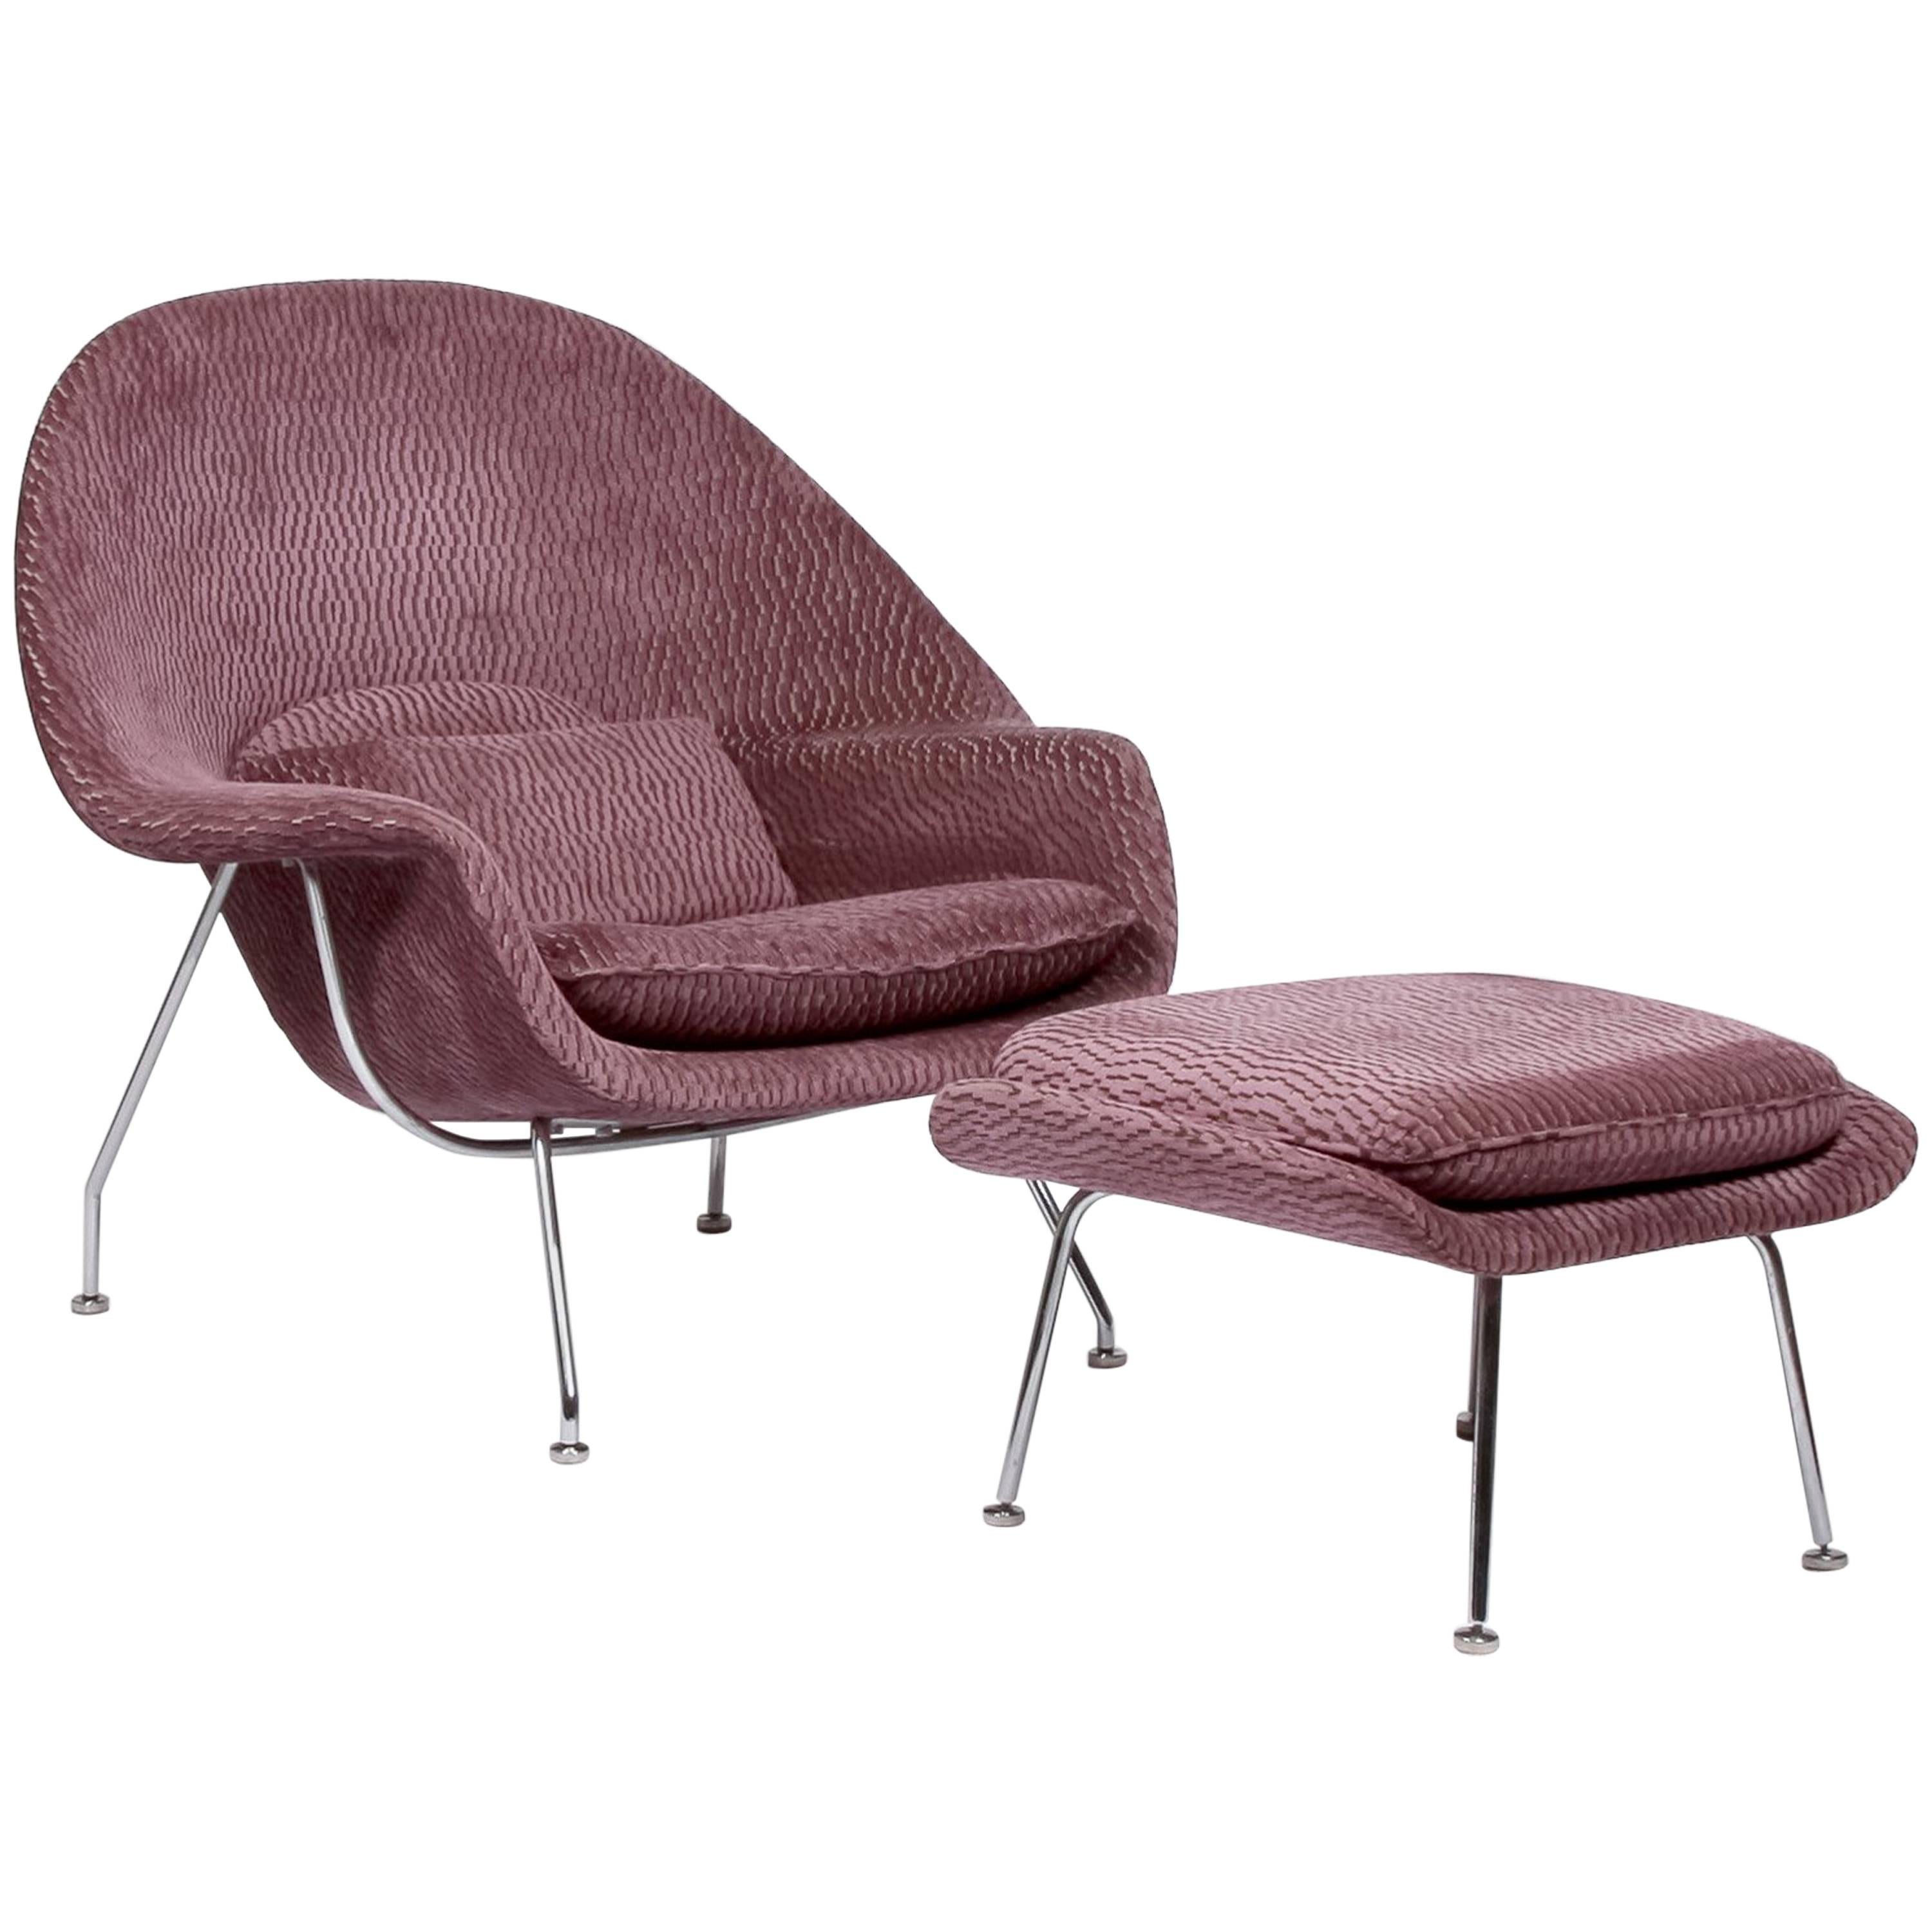 Vintage 'Womb Chair' and Matching Ottoman by Eero Saarinen For Sale